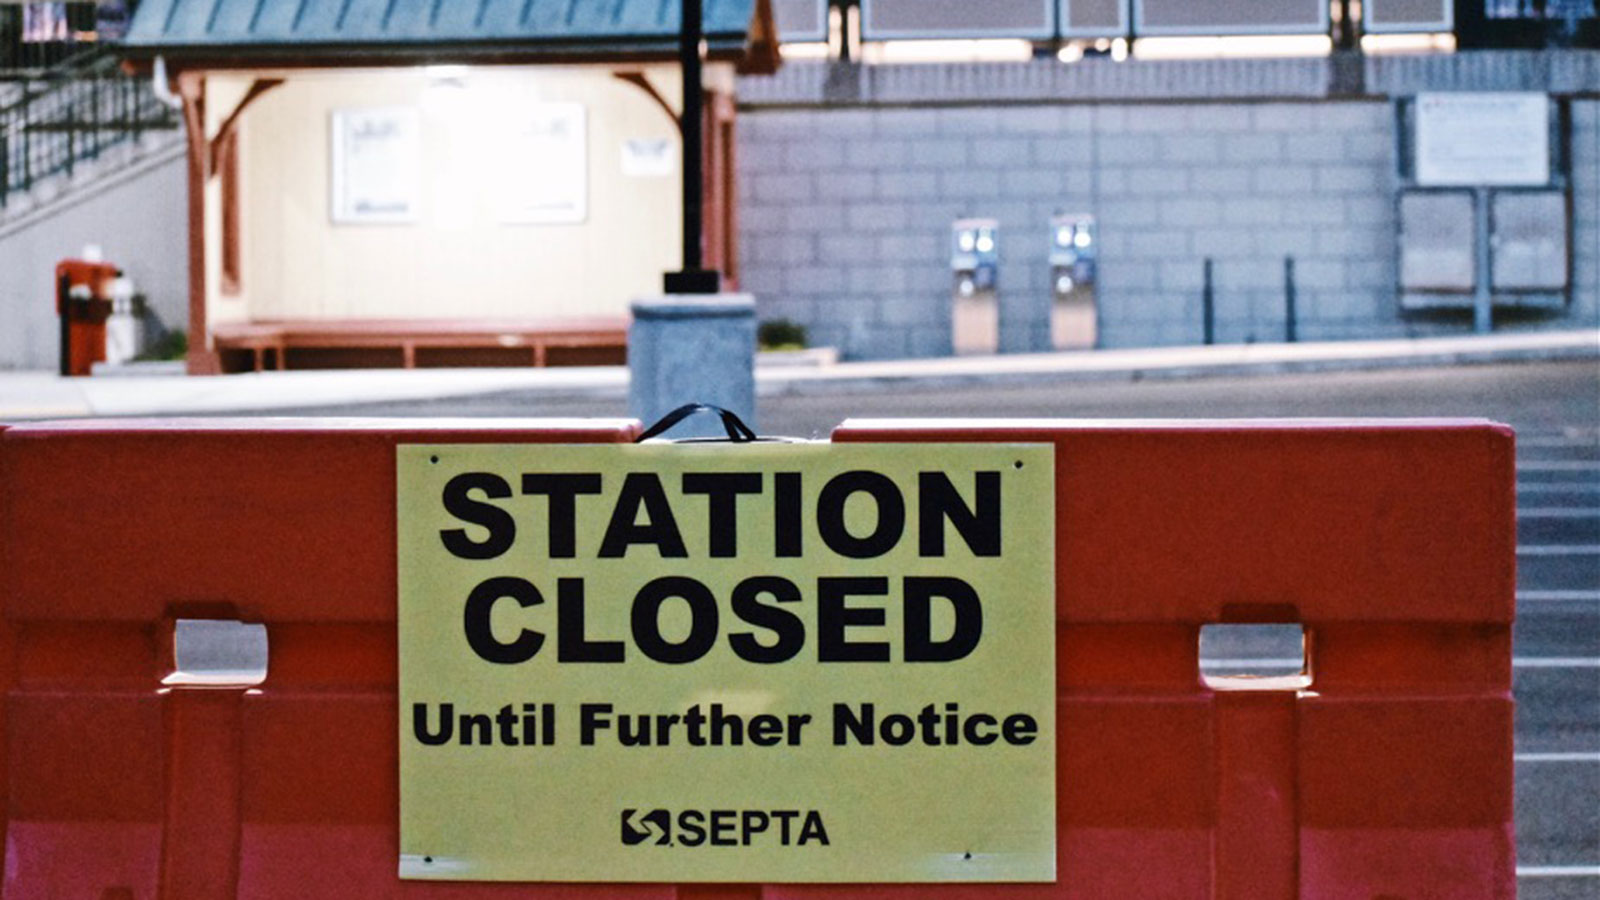 septa station closed sign at a bus stop